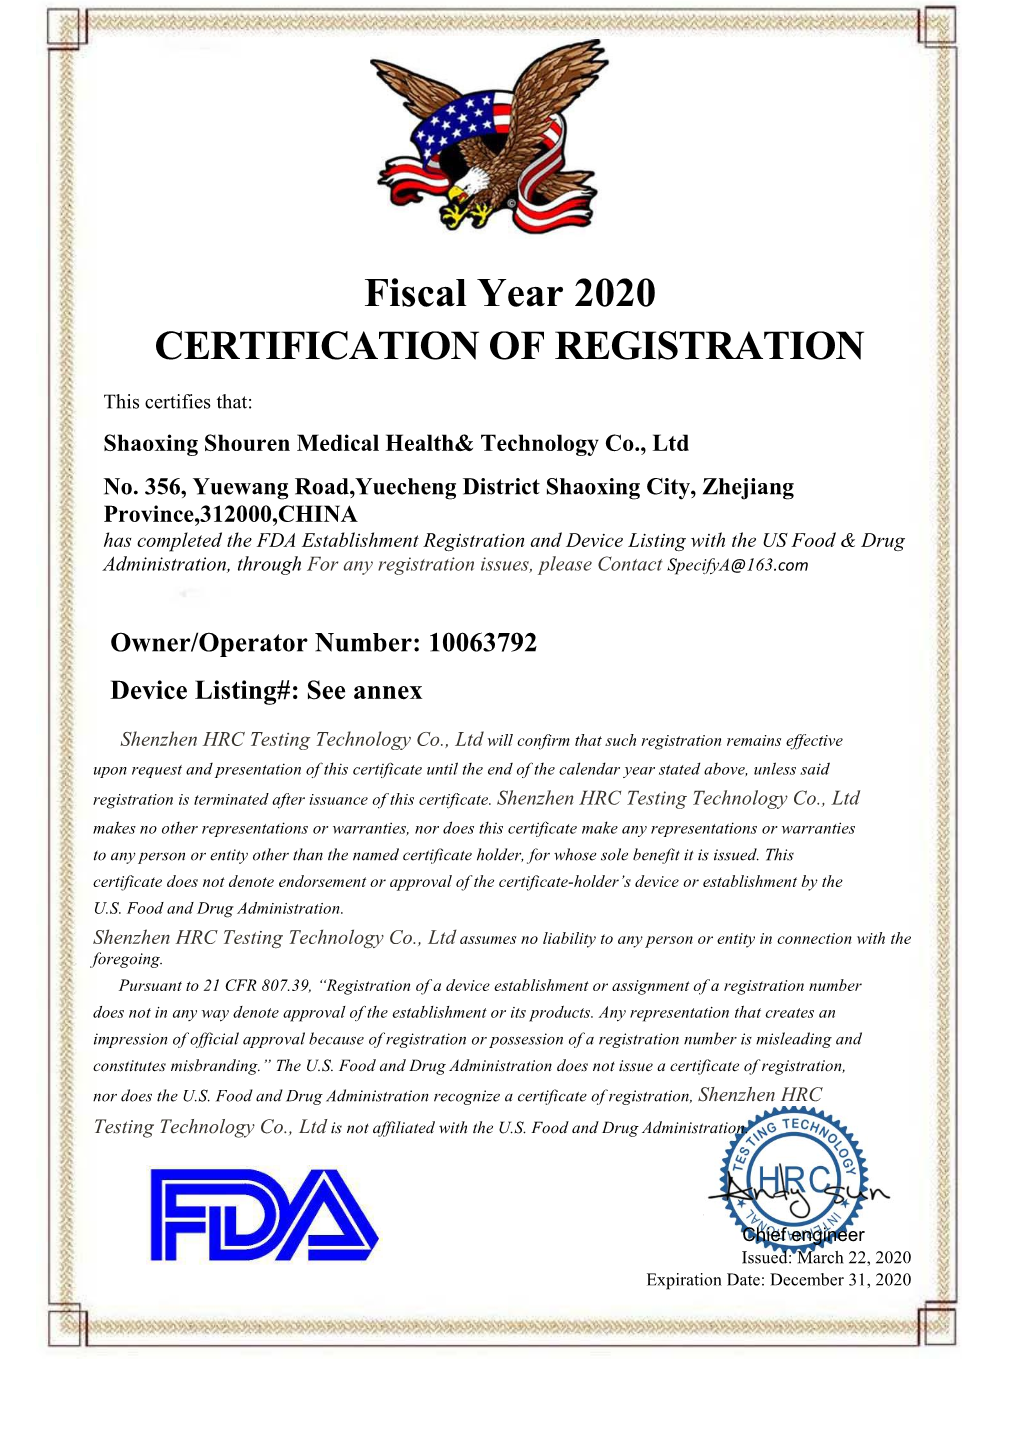 Fiscal Year 2020 CERTIFICATION of REGISTRATION